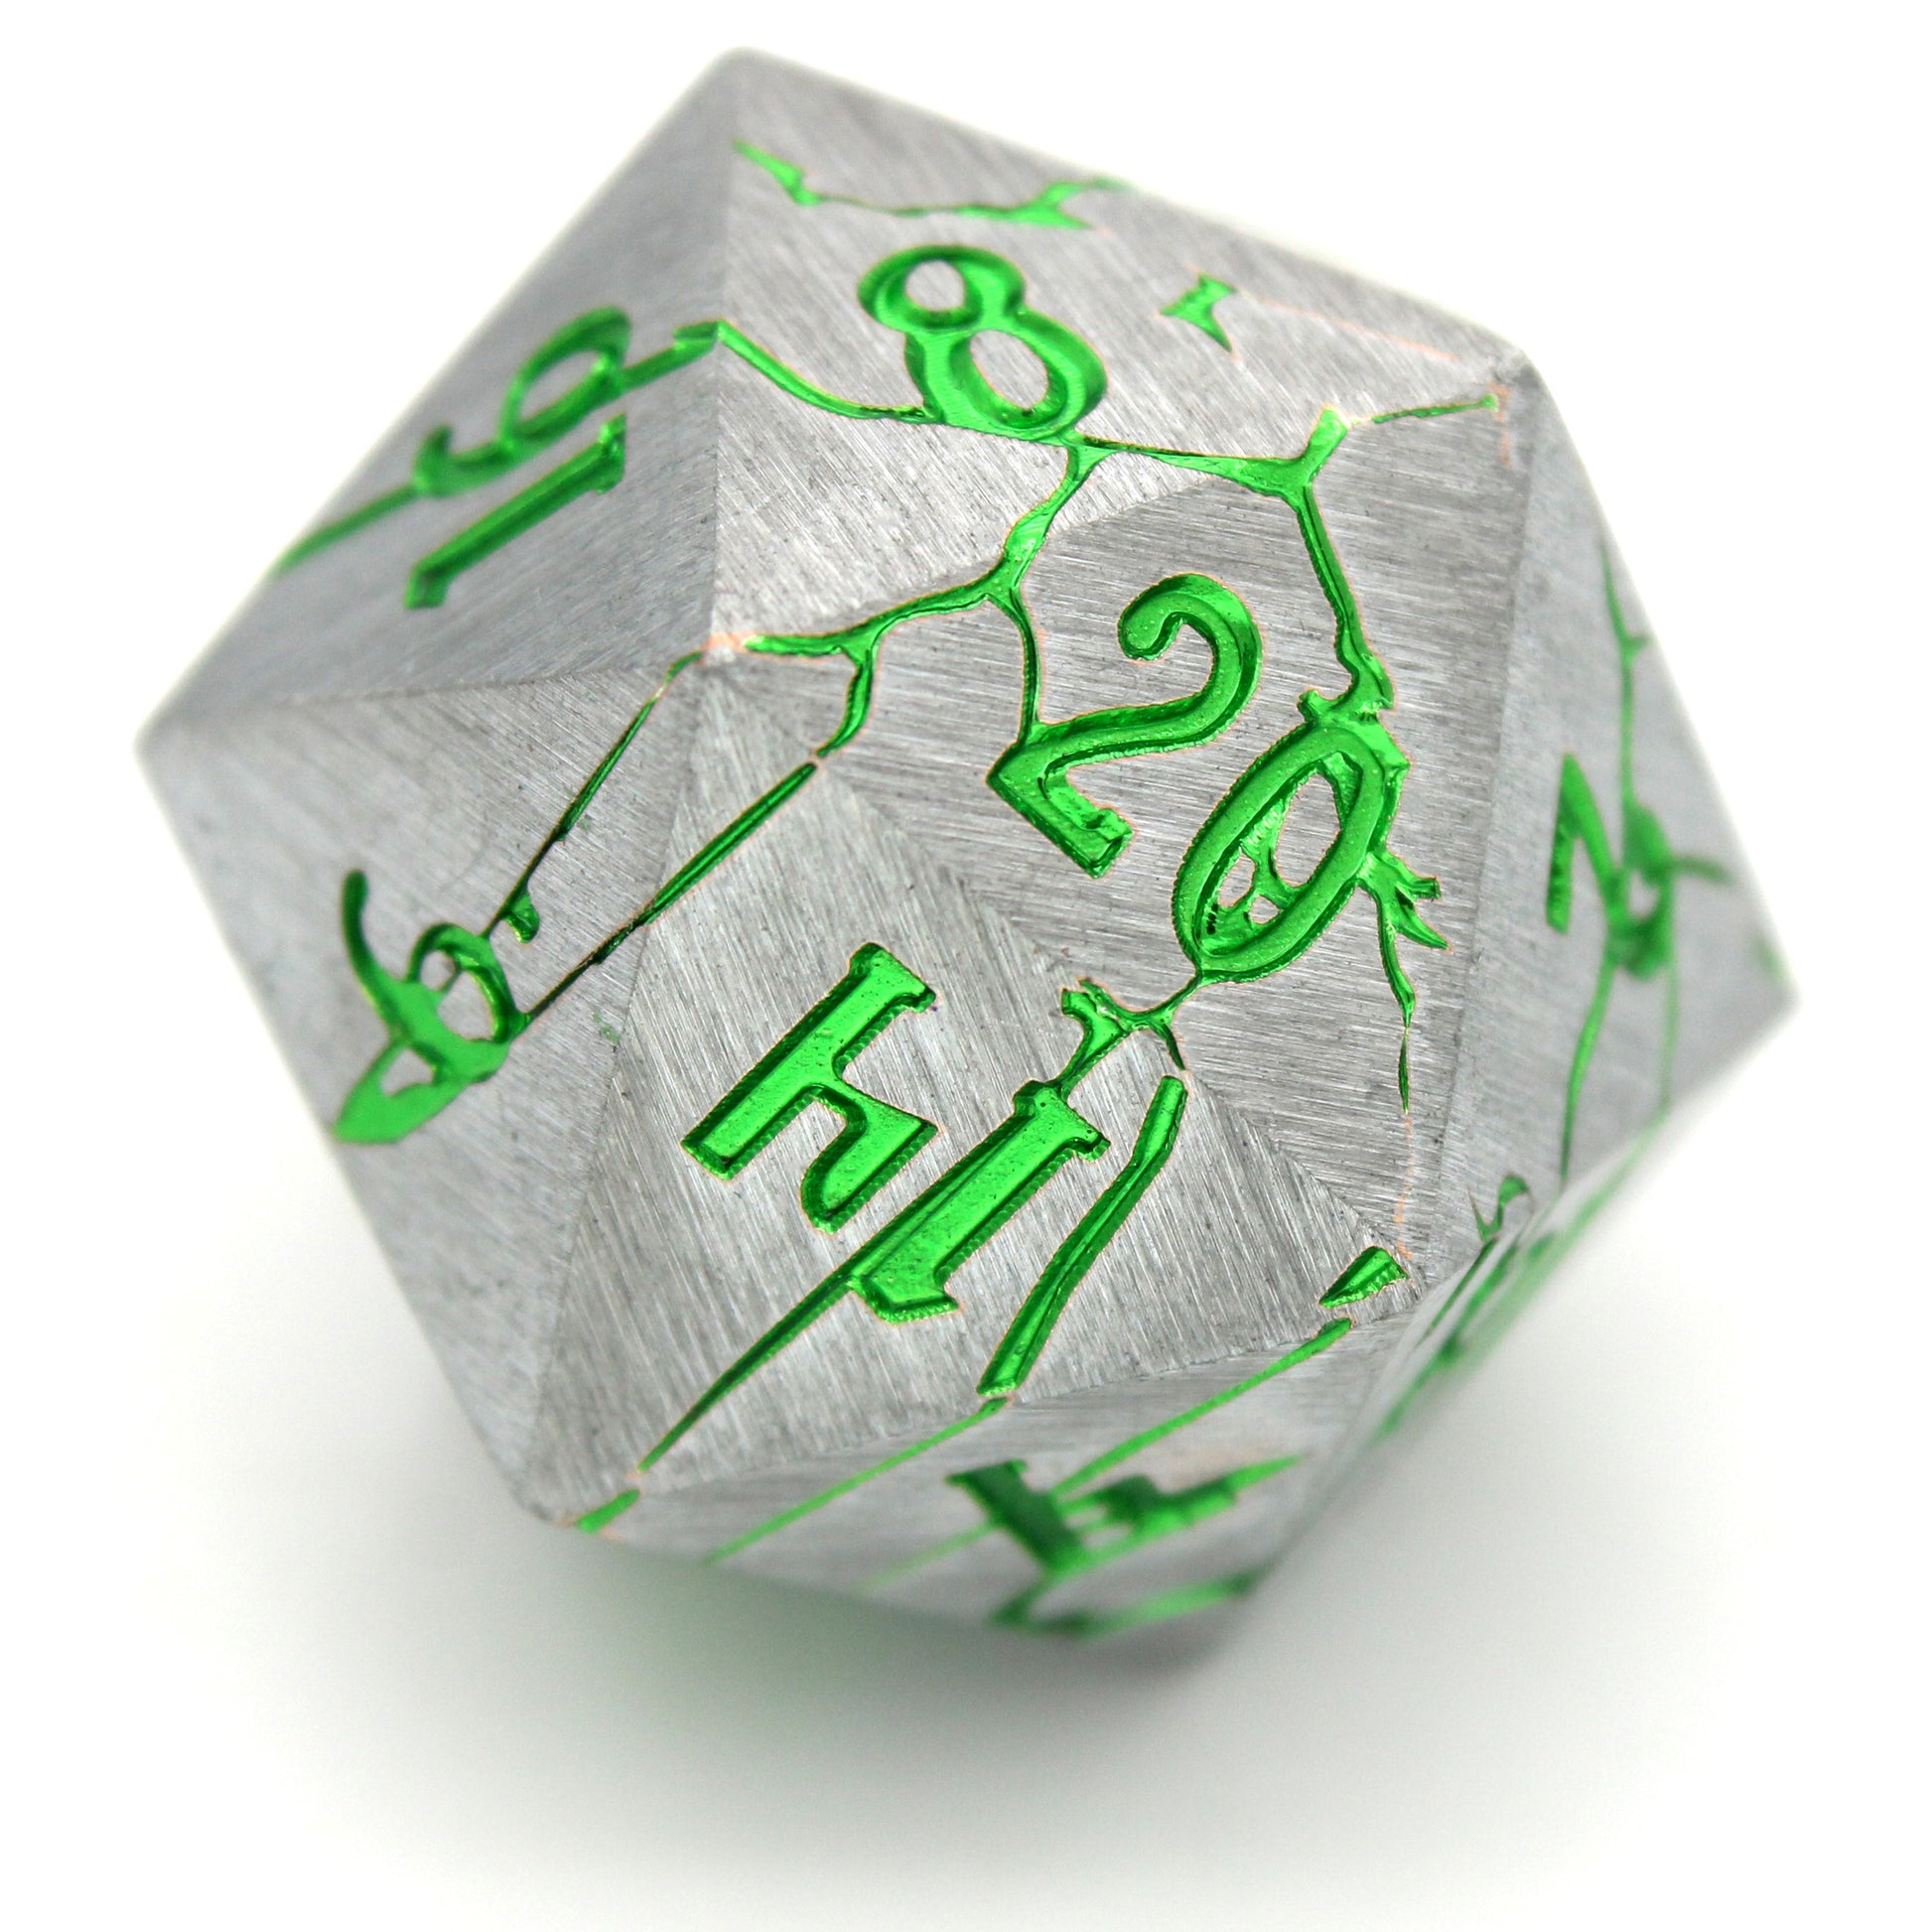 Minauros Mire is a 7-piece set of silver dice, streaked through with cracks and numbers of metallic green.